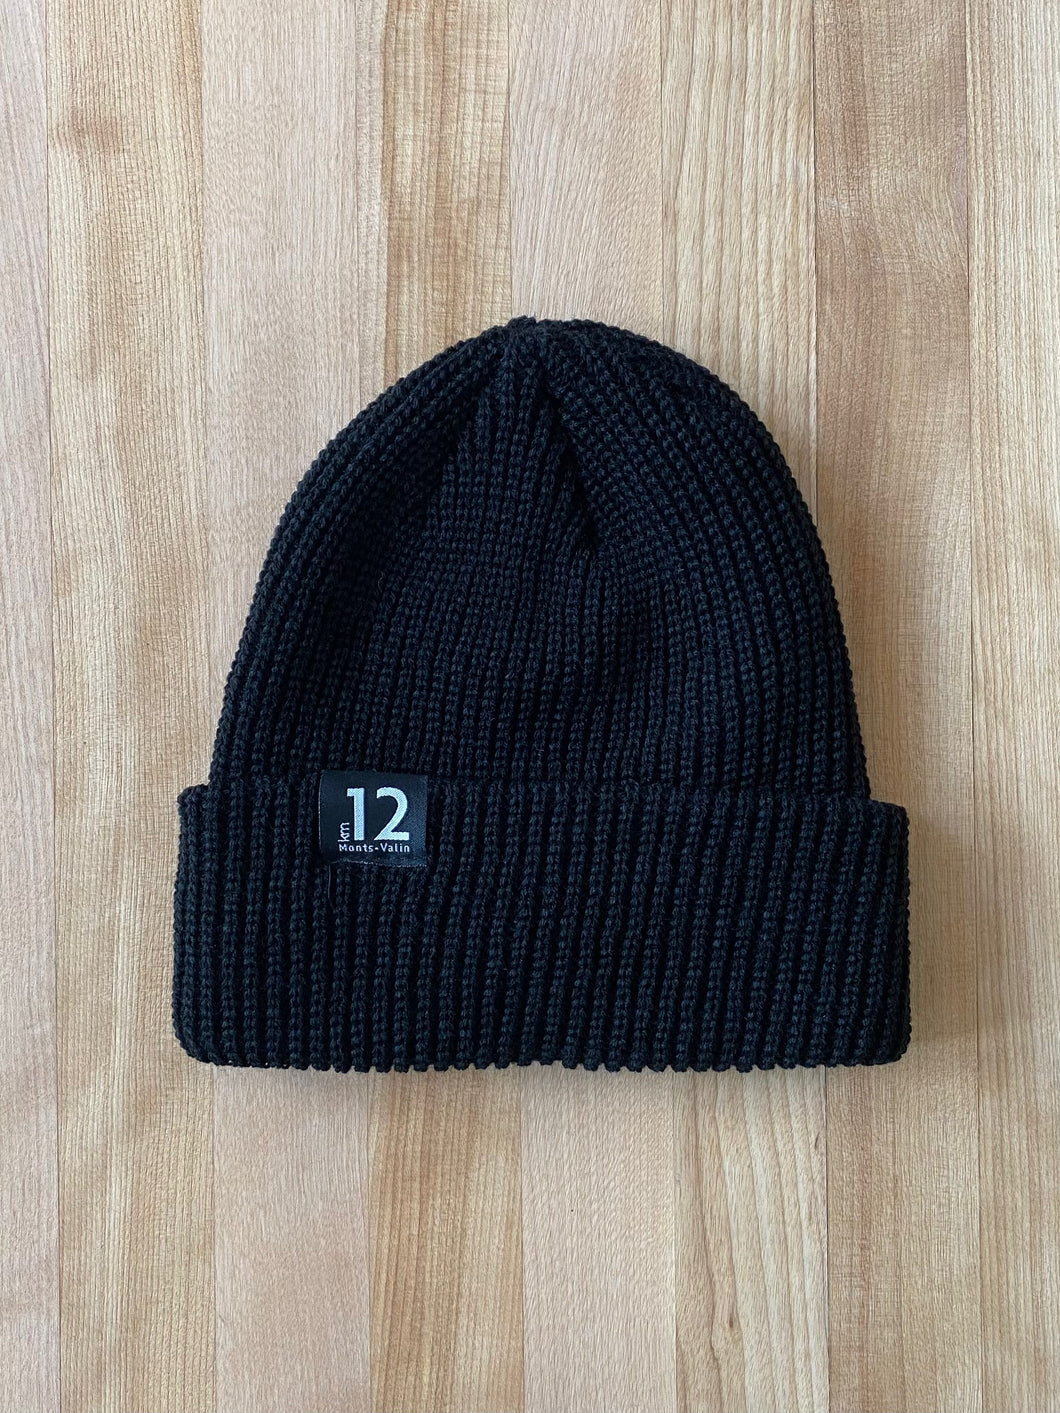 Tuque Km12